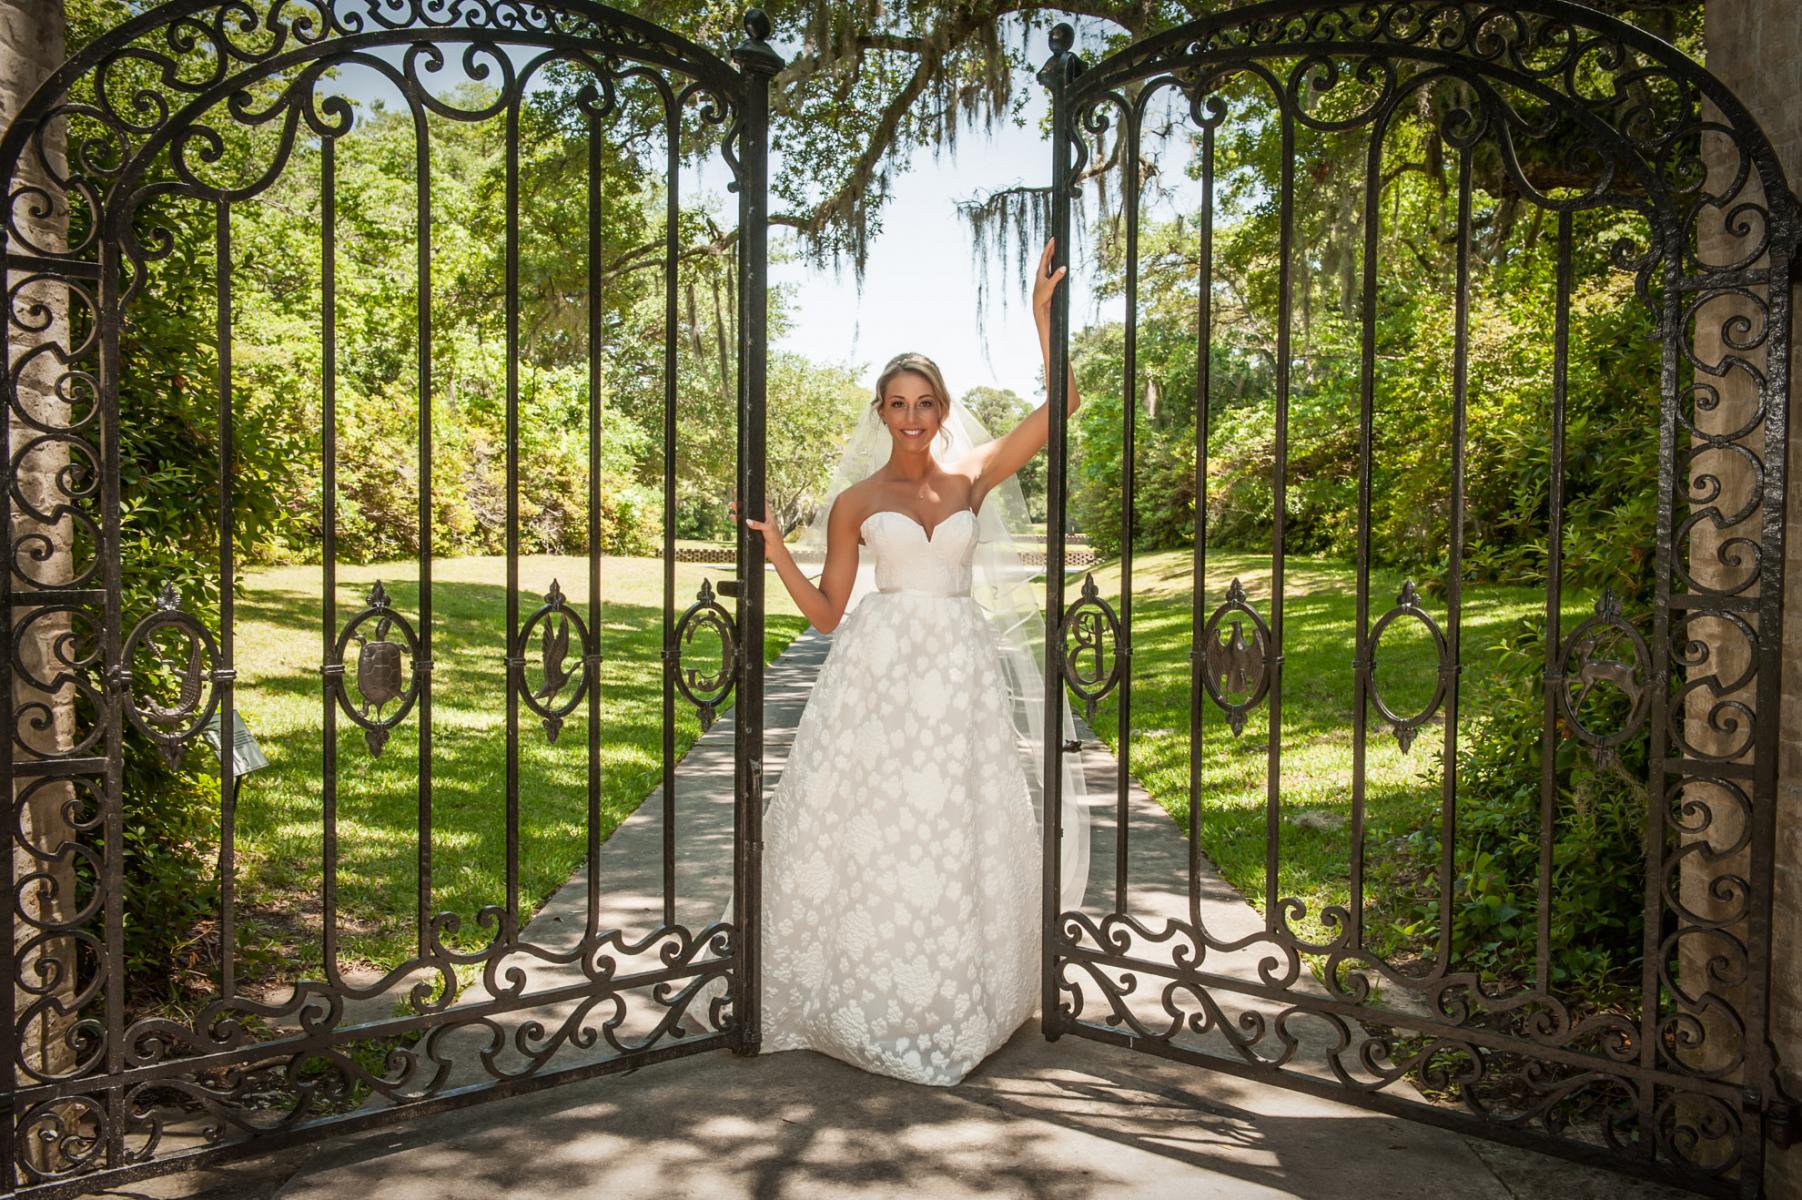 Gardens, Gates and Gowns